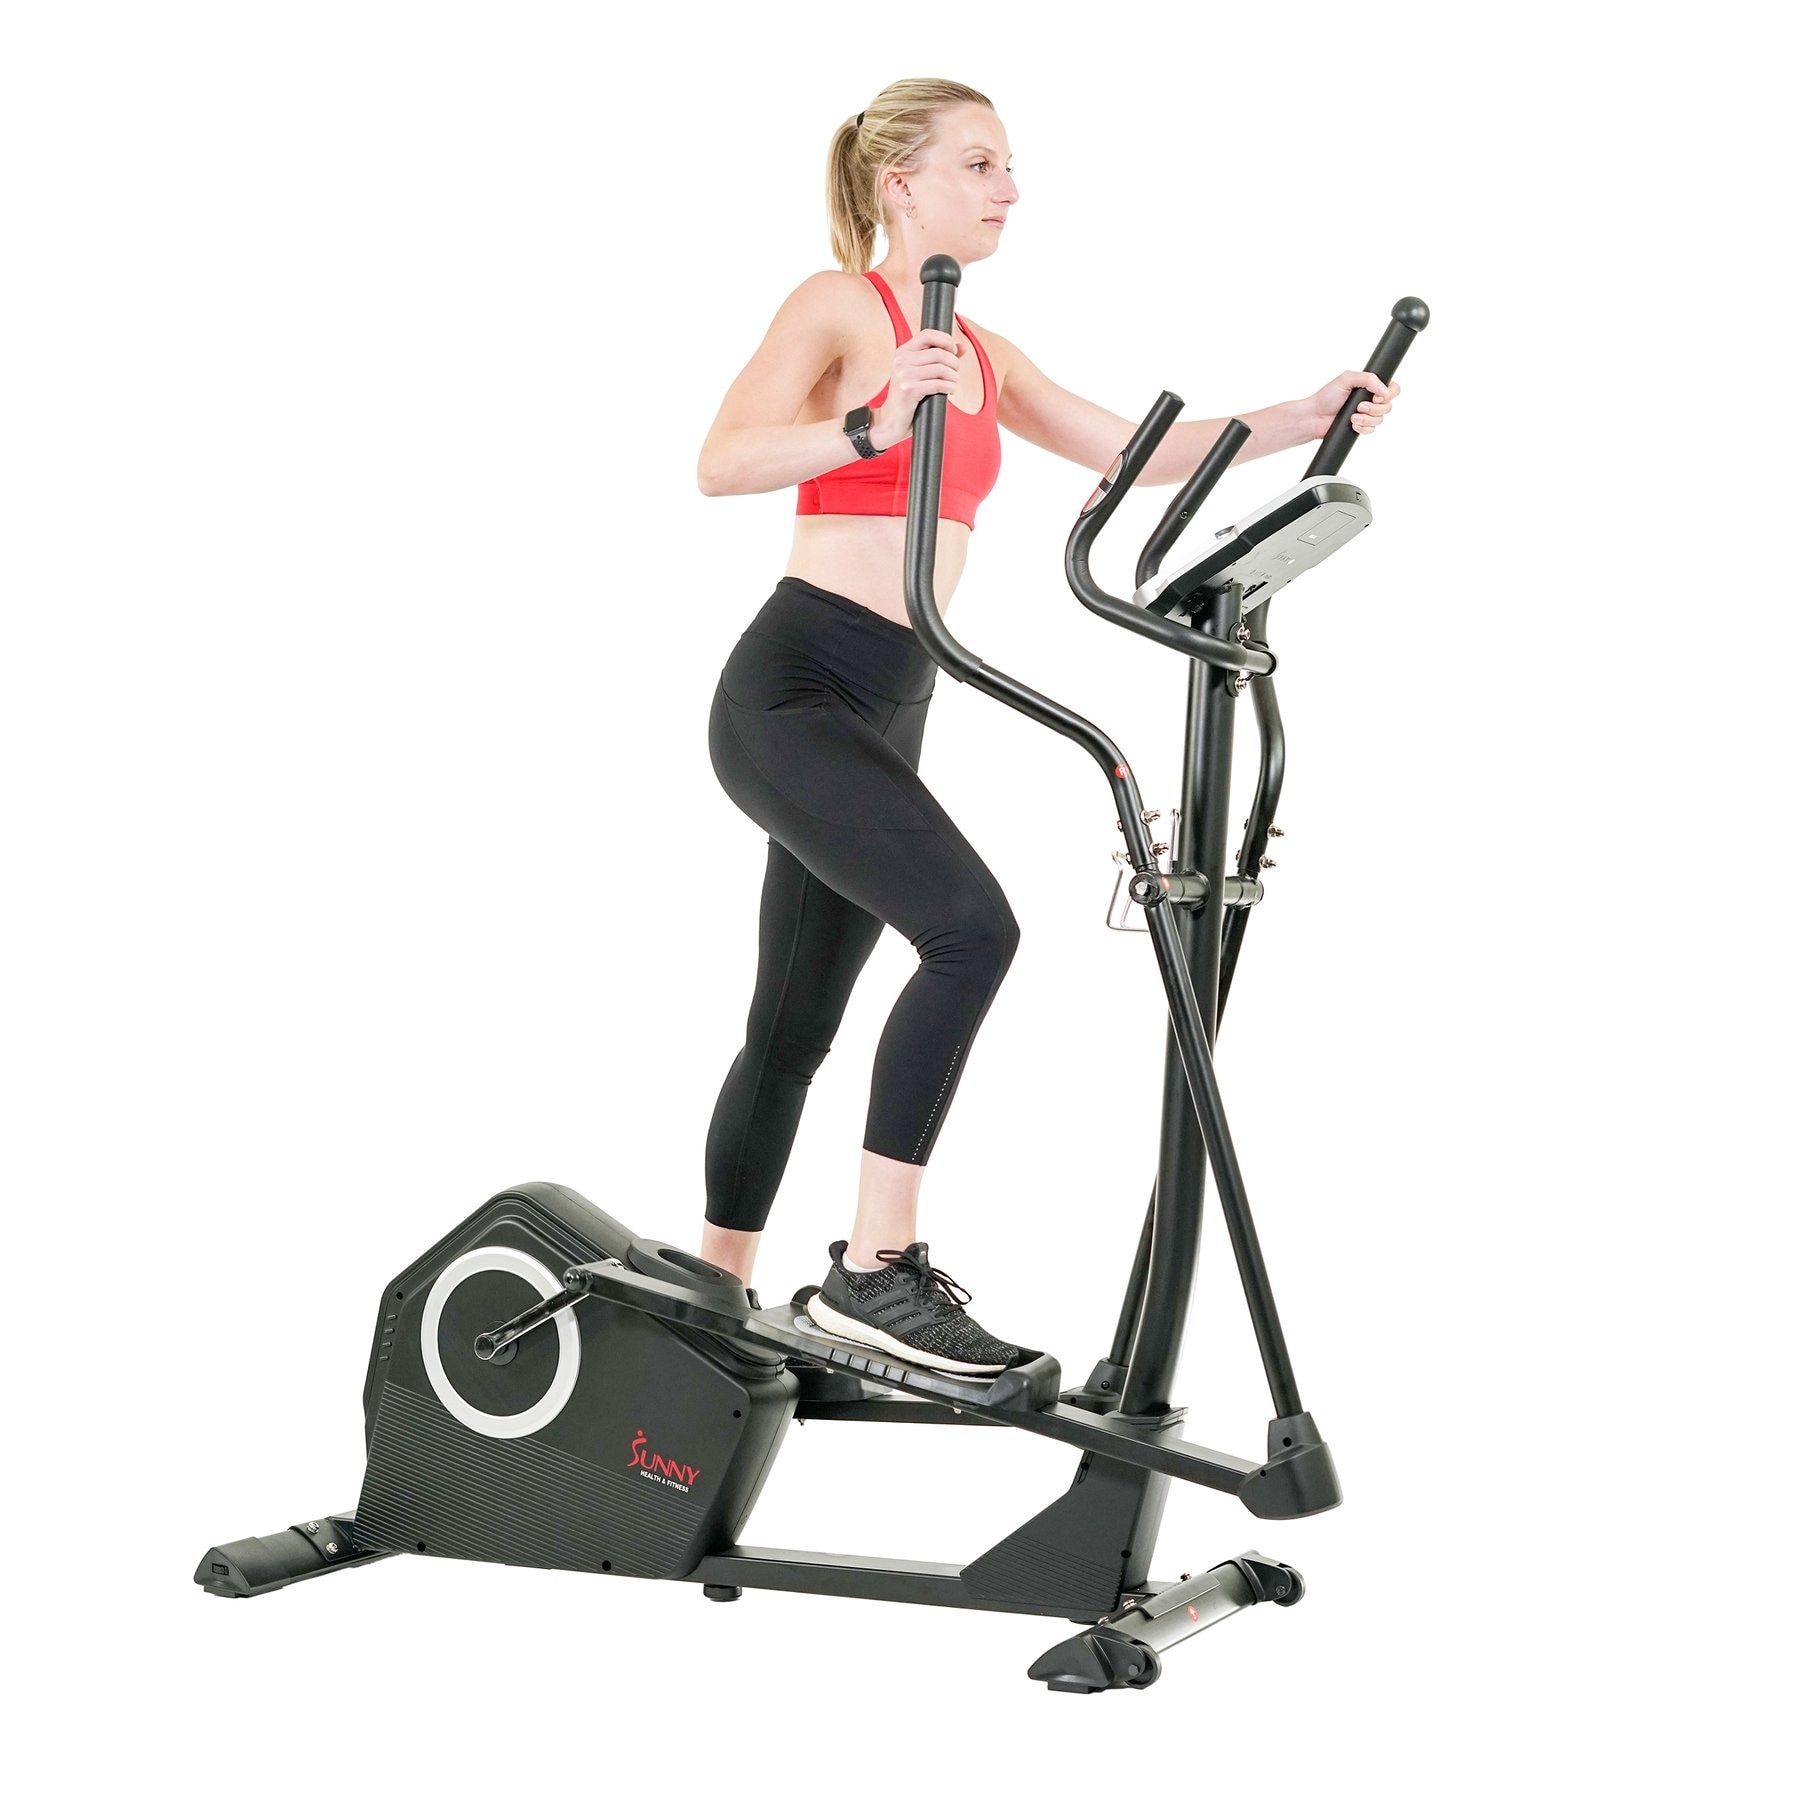 https://ak1.ostkcdn.com/images/products/is/images/direct/fe46220588391f84b838280a3da5c6ce28535bf8/Sunny-Health-Fitness-Programmable-Cardio-Elliptical-Trainer--SF-E3890.jpg